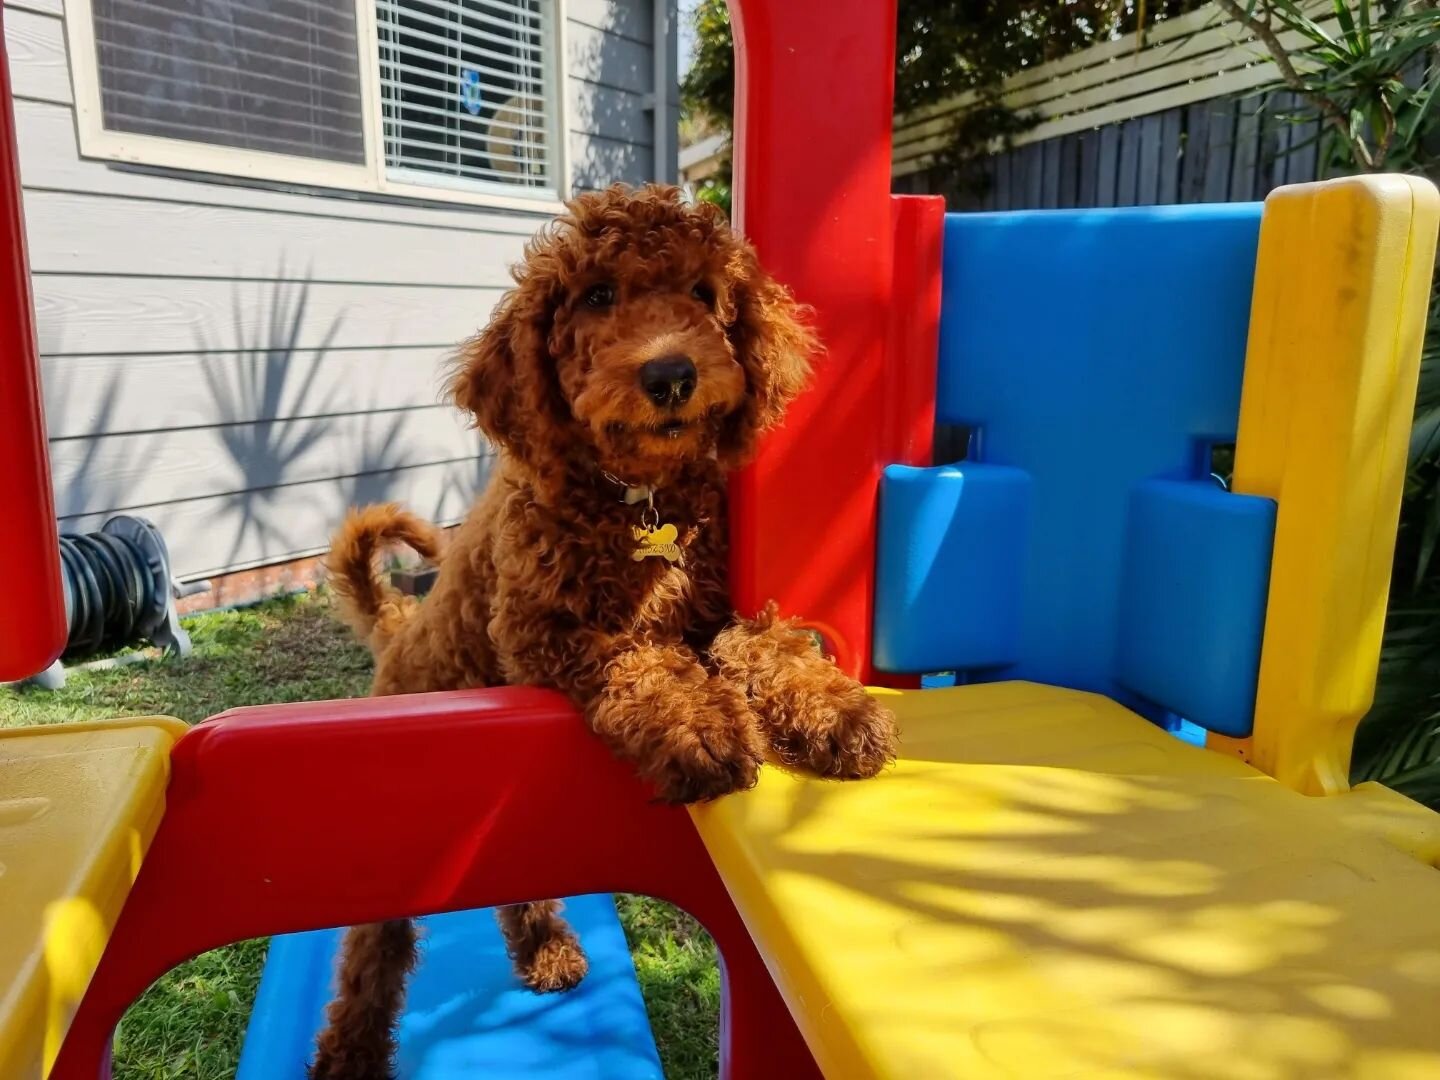 🌟 Unique Pet Experiences 🌟 

🐶 I loved hanging out with this gorgeous poodle puppy,  Felix. Another tired but happy little customer 🐶

#smilingdogs 

www.uniquepetexperiences.com.au